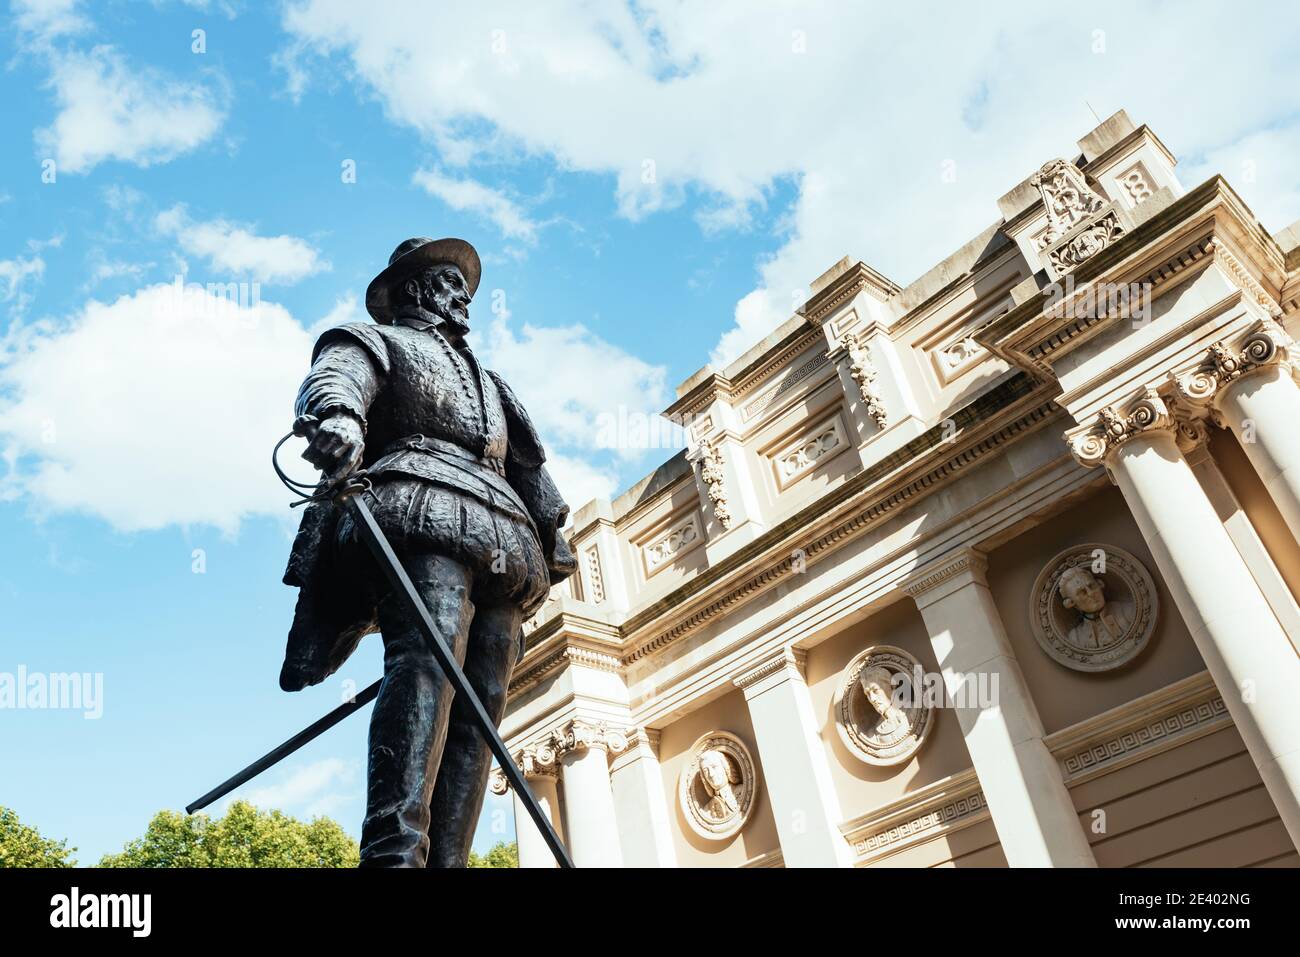 Statue de Sir Walter Raleigh devant la chapelle du Royal Naval College, Old Royal Naval College, Greenwich, Londres, Angleterre, Royaume-Uni Banque D'Images